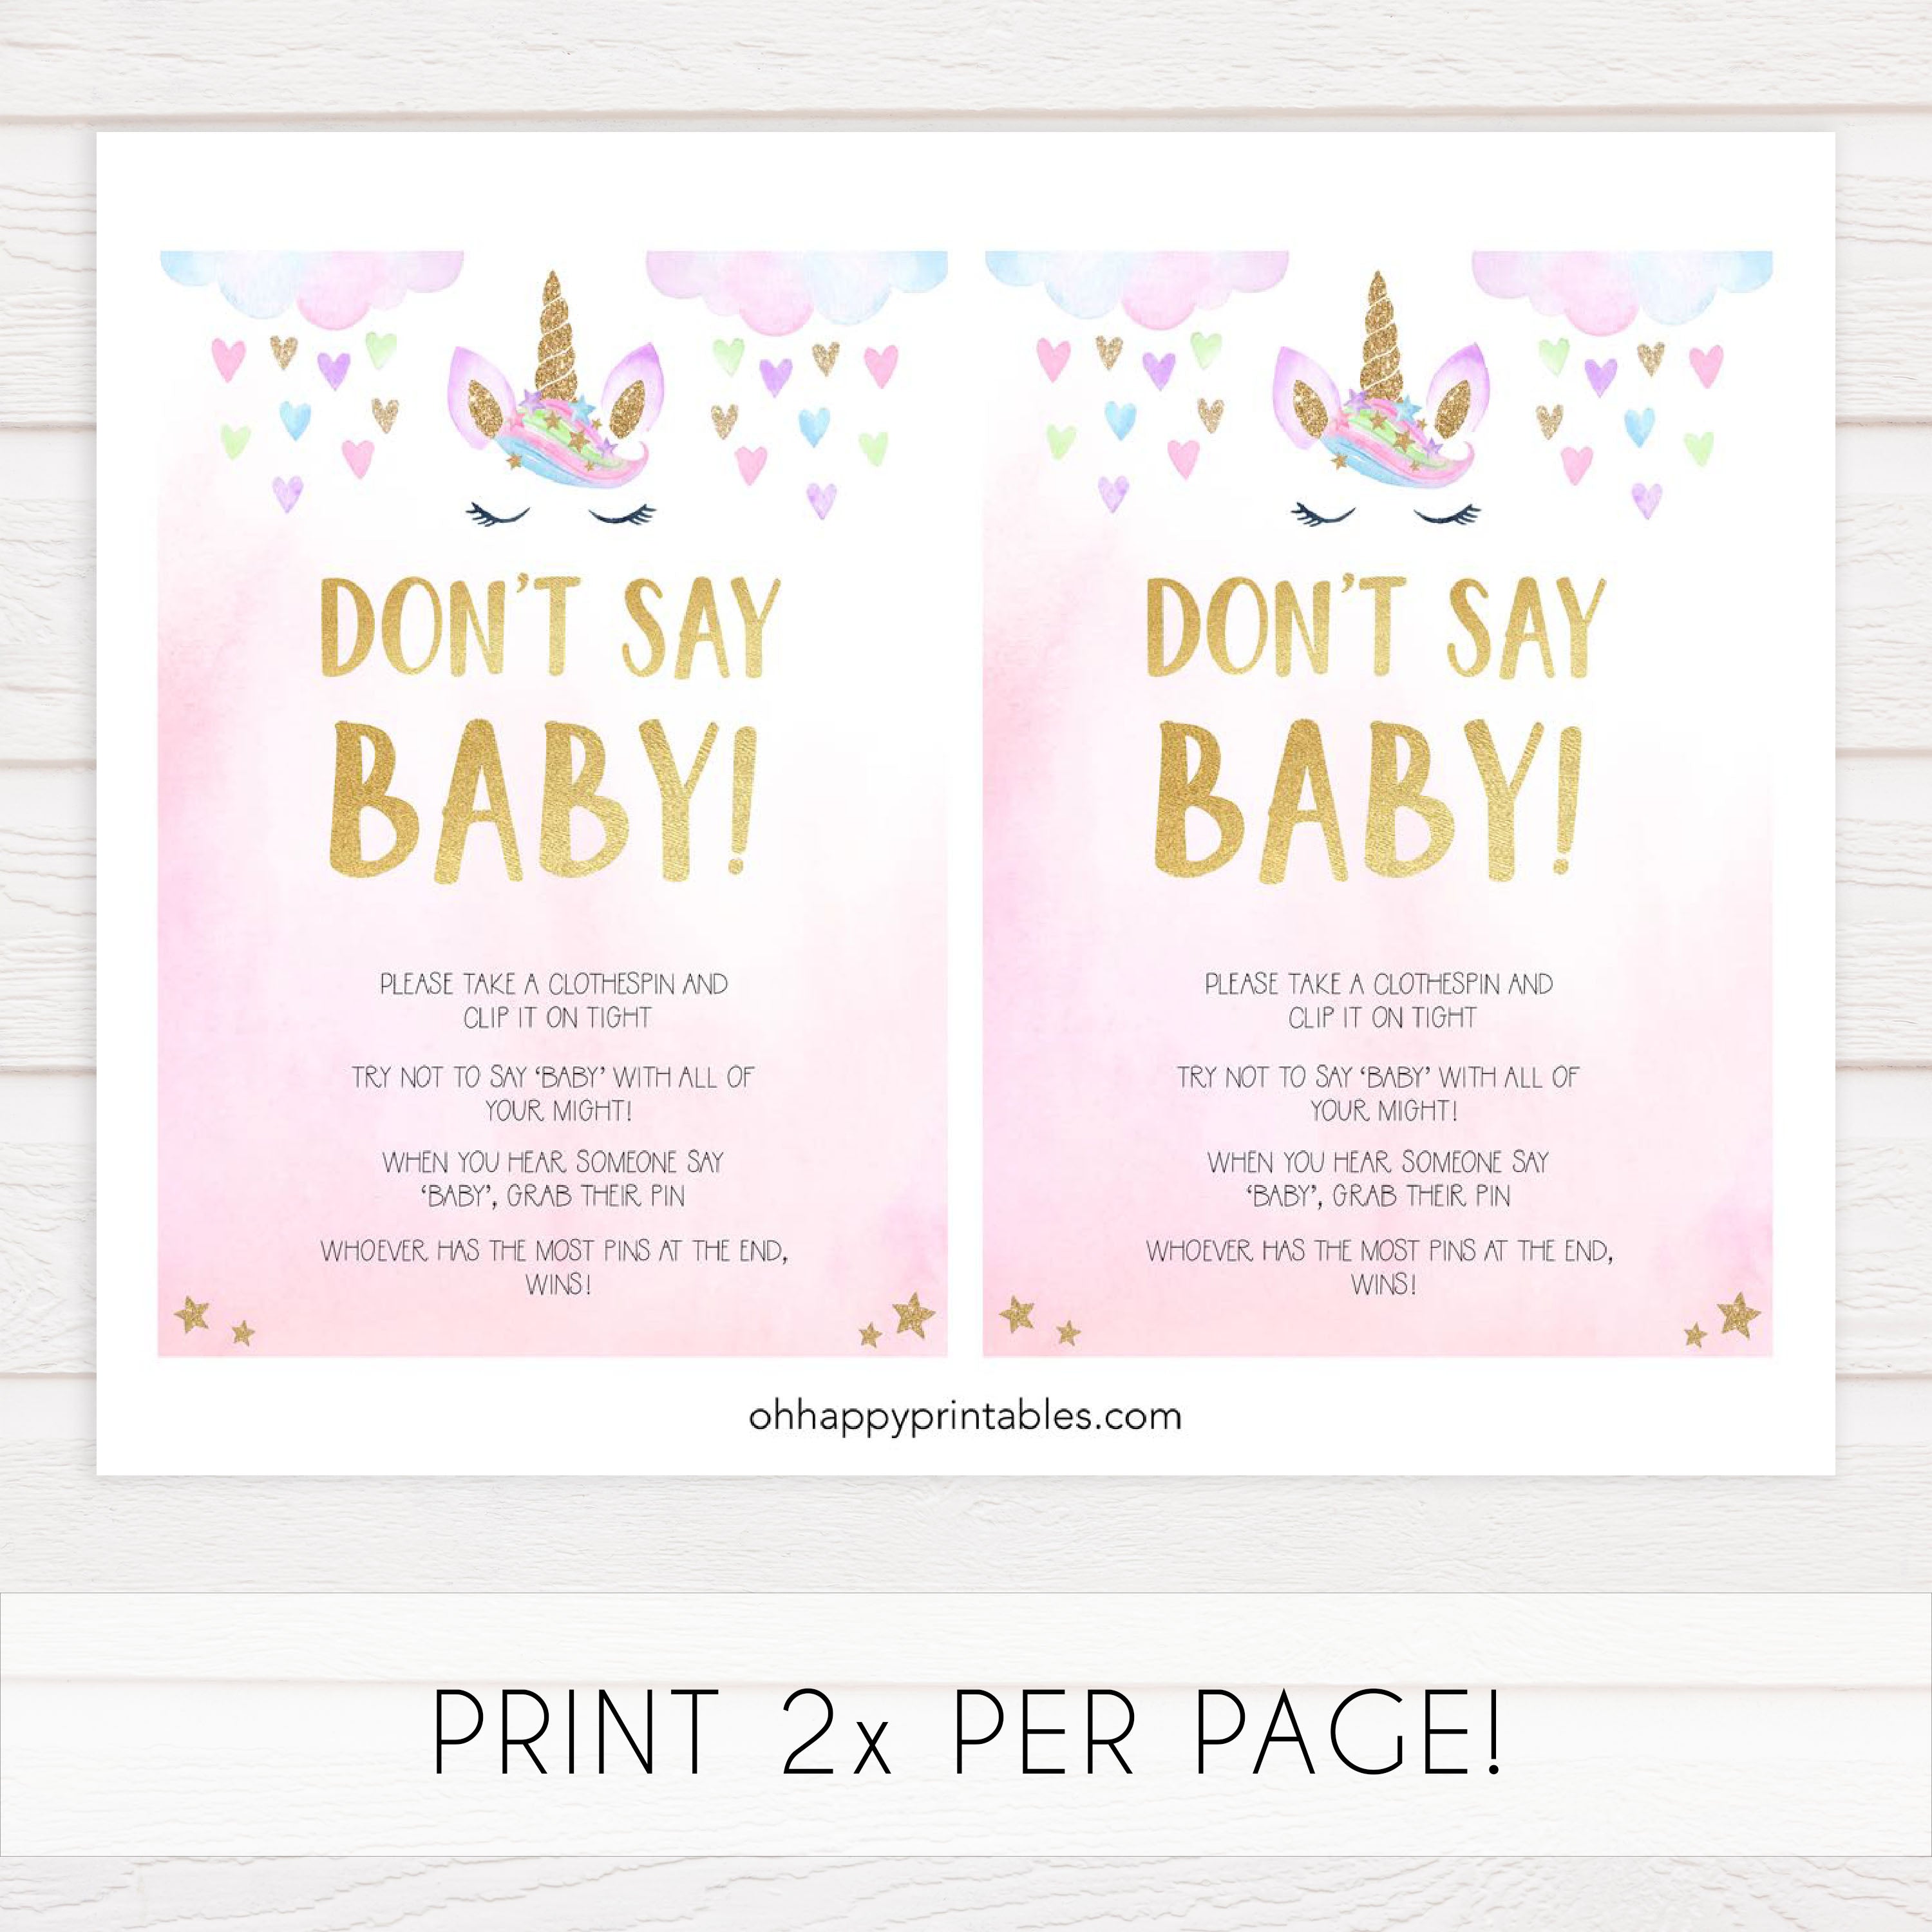 dont say baby game, Printable baby shower games, unicorn baby games, baby shower games, fun baby shower ideas, top baby shower ideas, unicorn baby shower, baby shower games, fun unicorn baby shower ideas